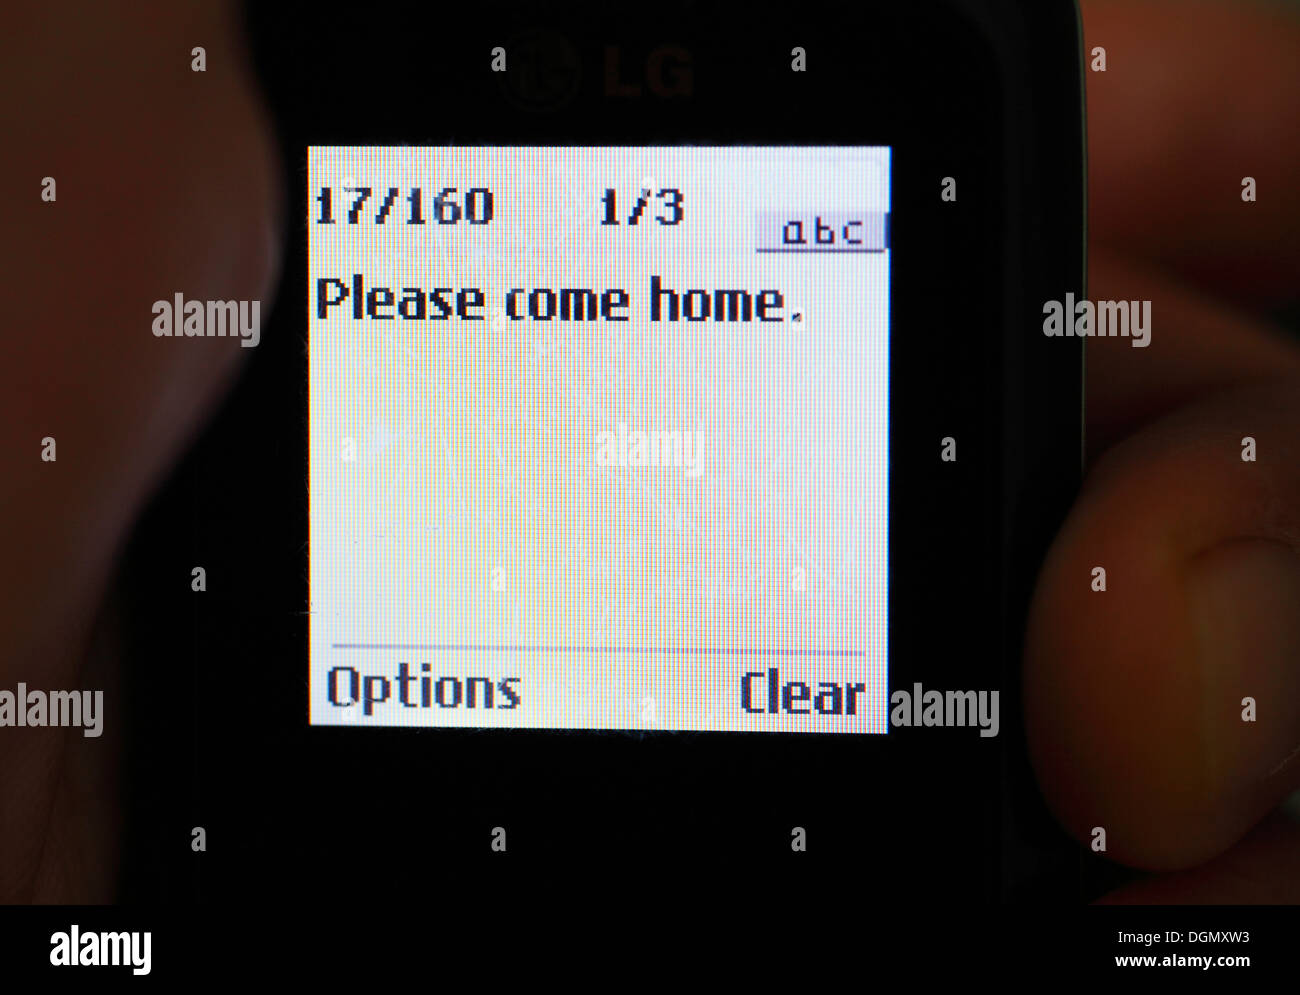 Mobile phone displaying the test message 'Please come home'. Stock Photo